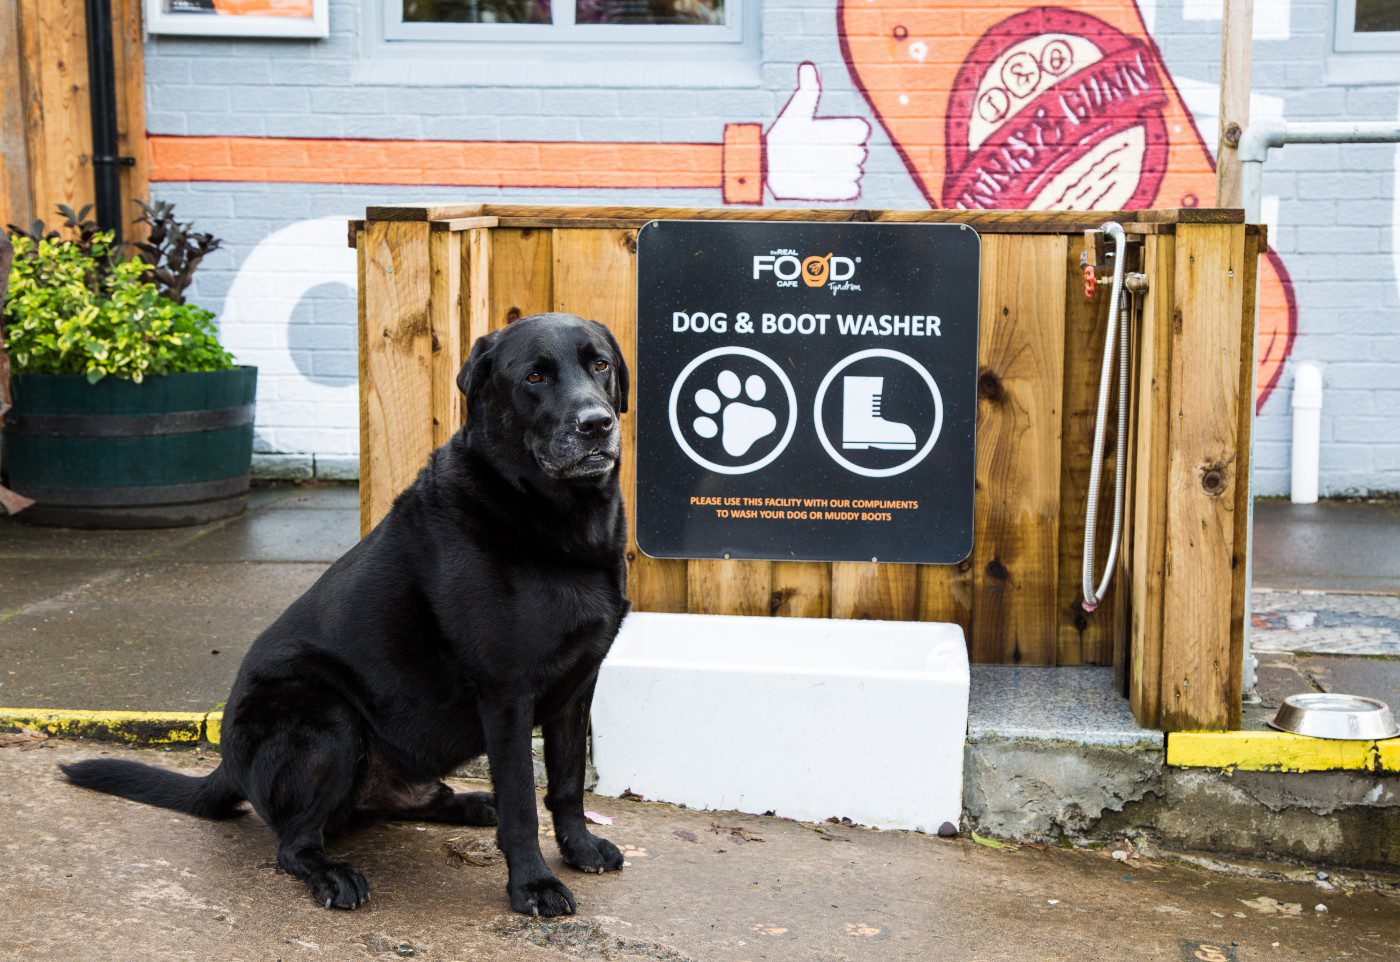 10 of the best dog-friendly restaurants and cafes in Scotland